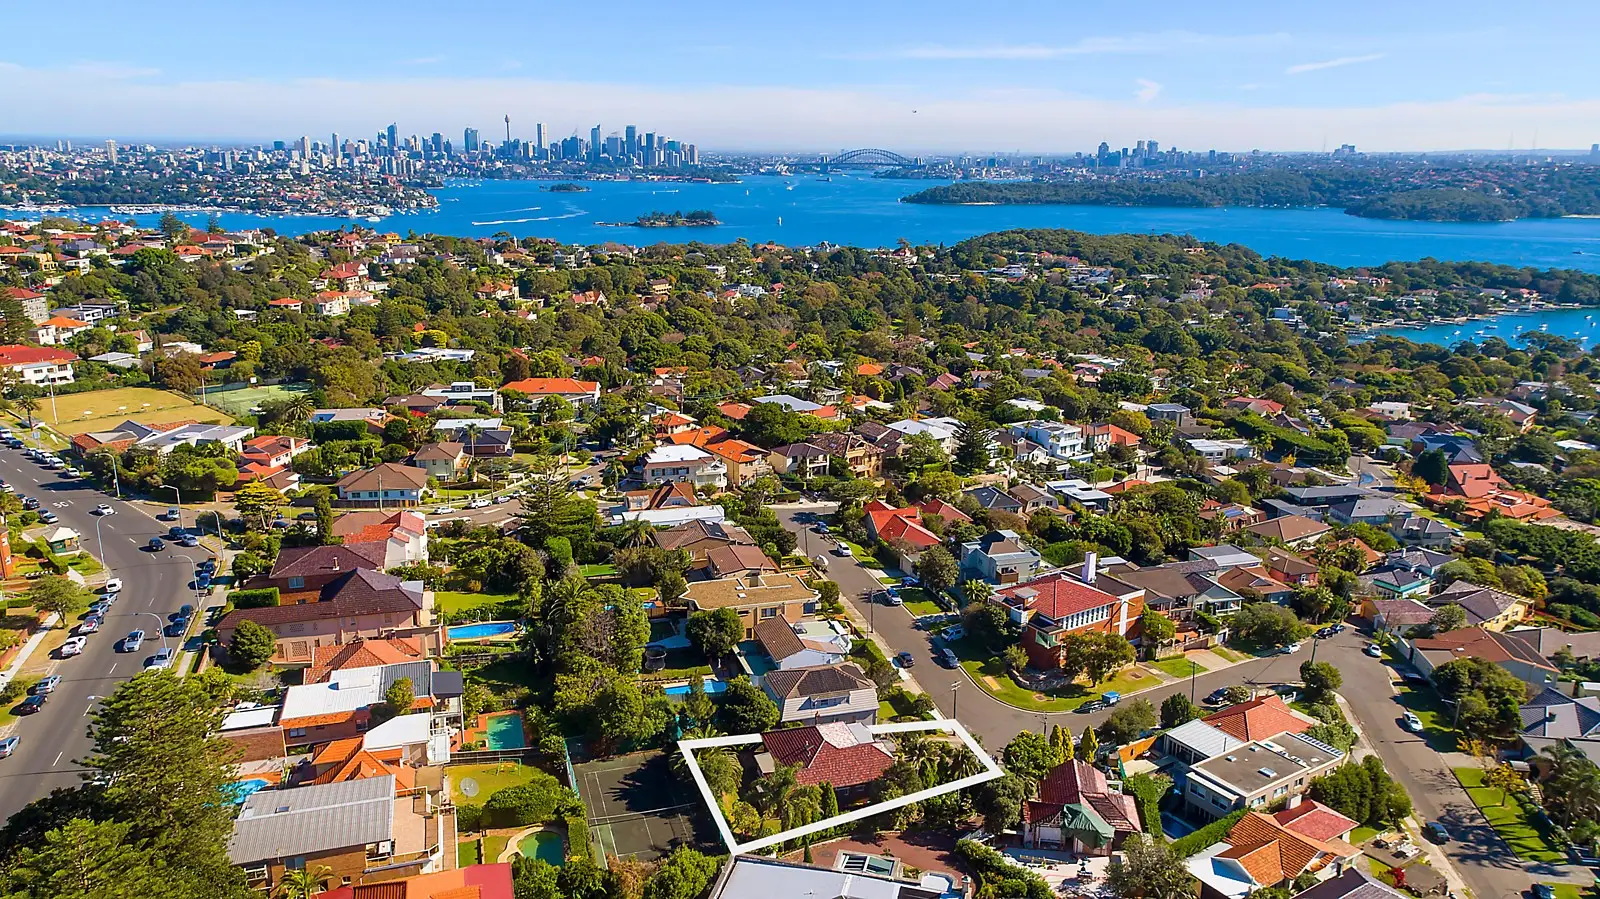 Photo #1: 15 Olphert Avenue, Vaucluse - Sold by Sydney Sotheby's International Realty